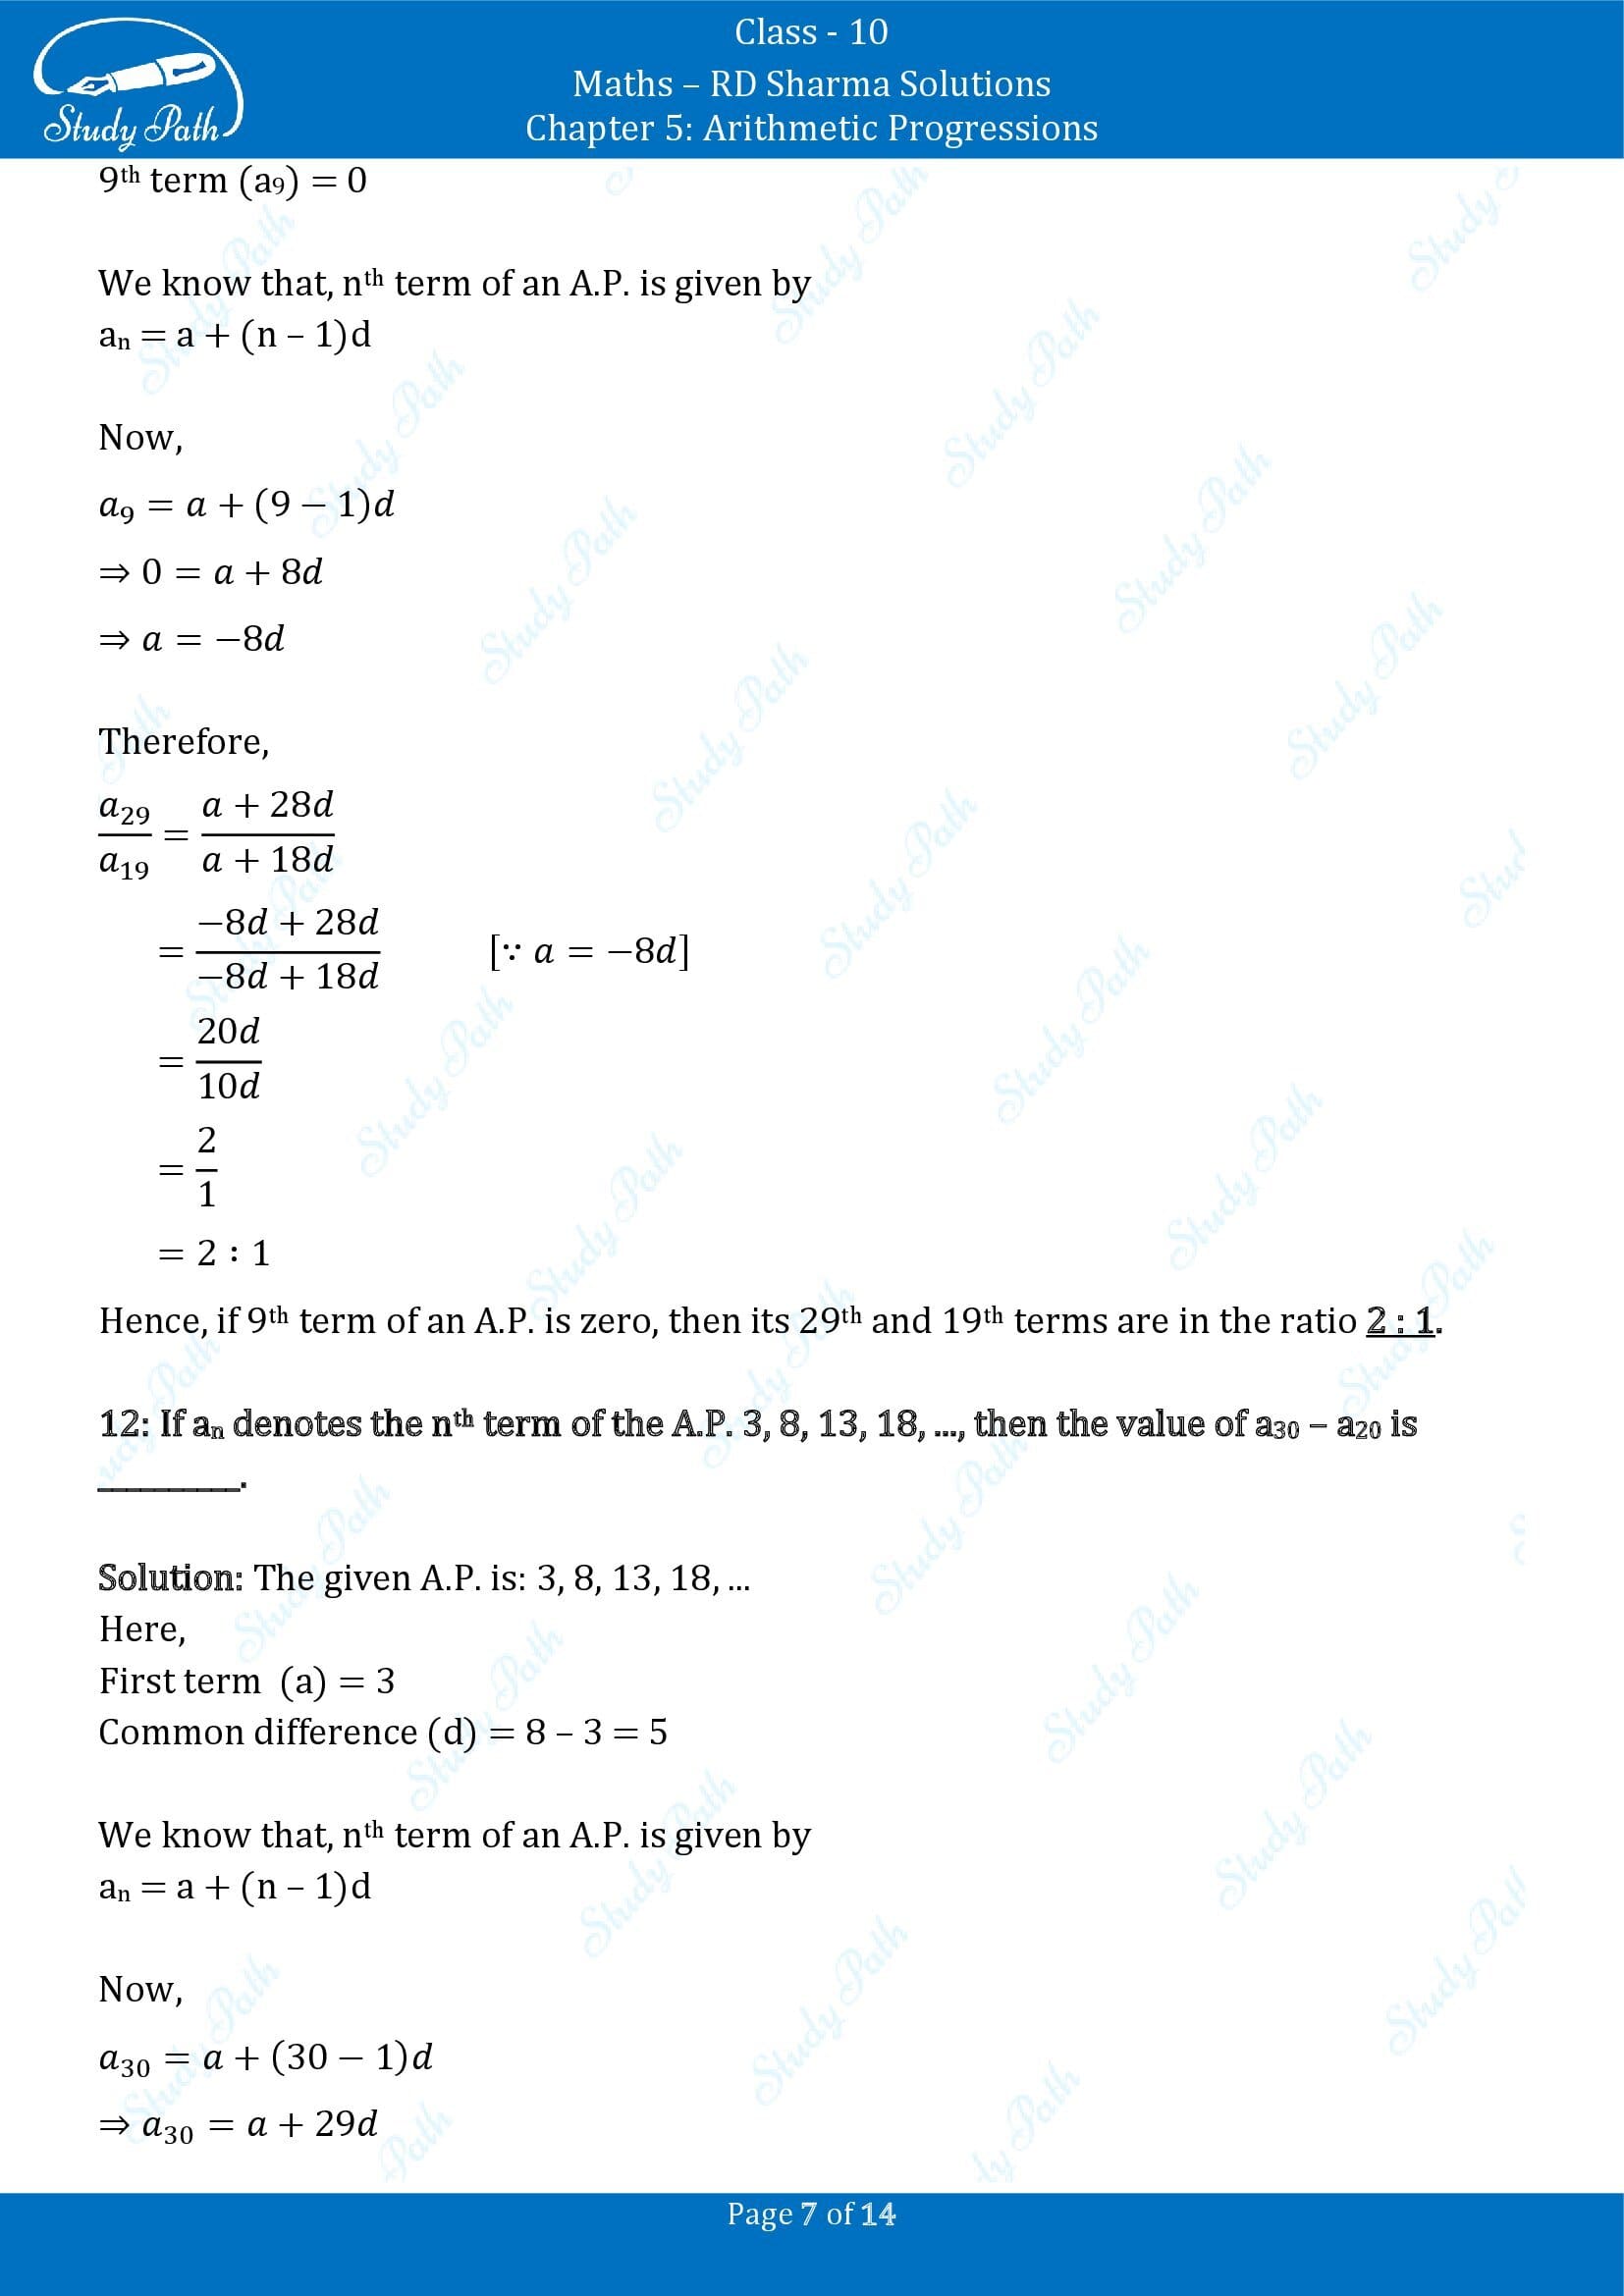 RD Sharma Solutions Class 10 Chapter 5 Arithmetic Progressions Fill in the Blank Type Questions FBQs 00007